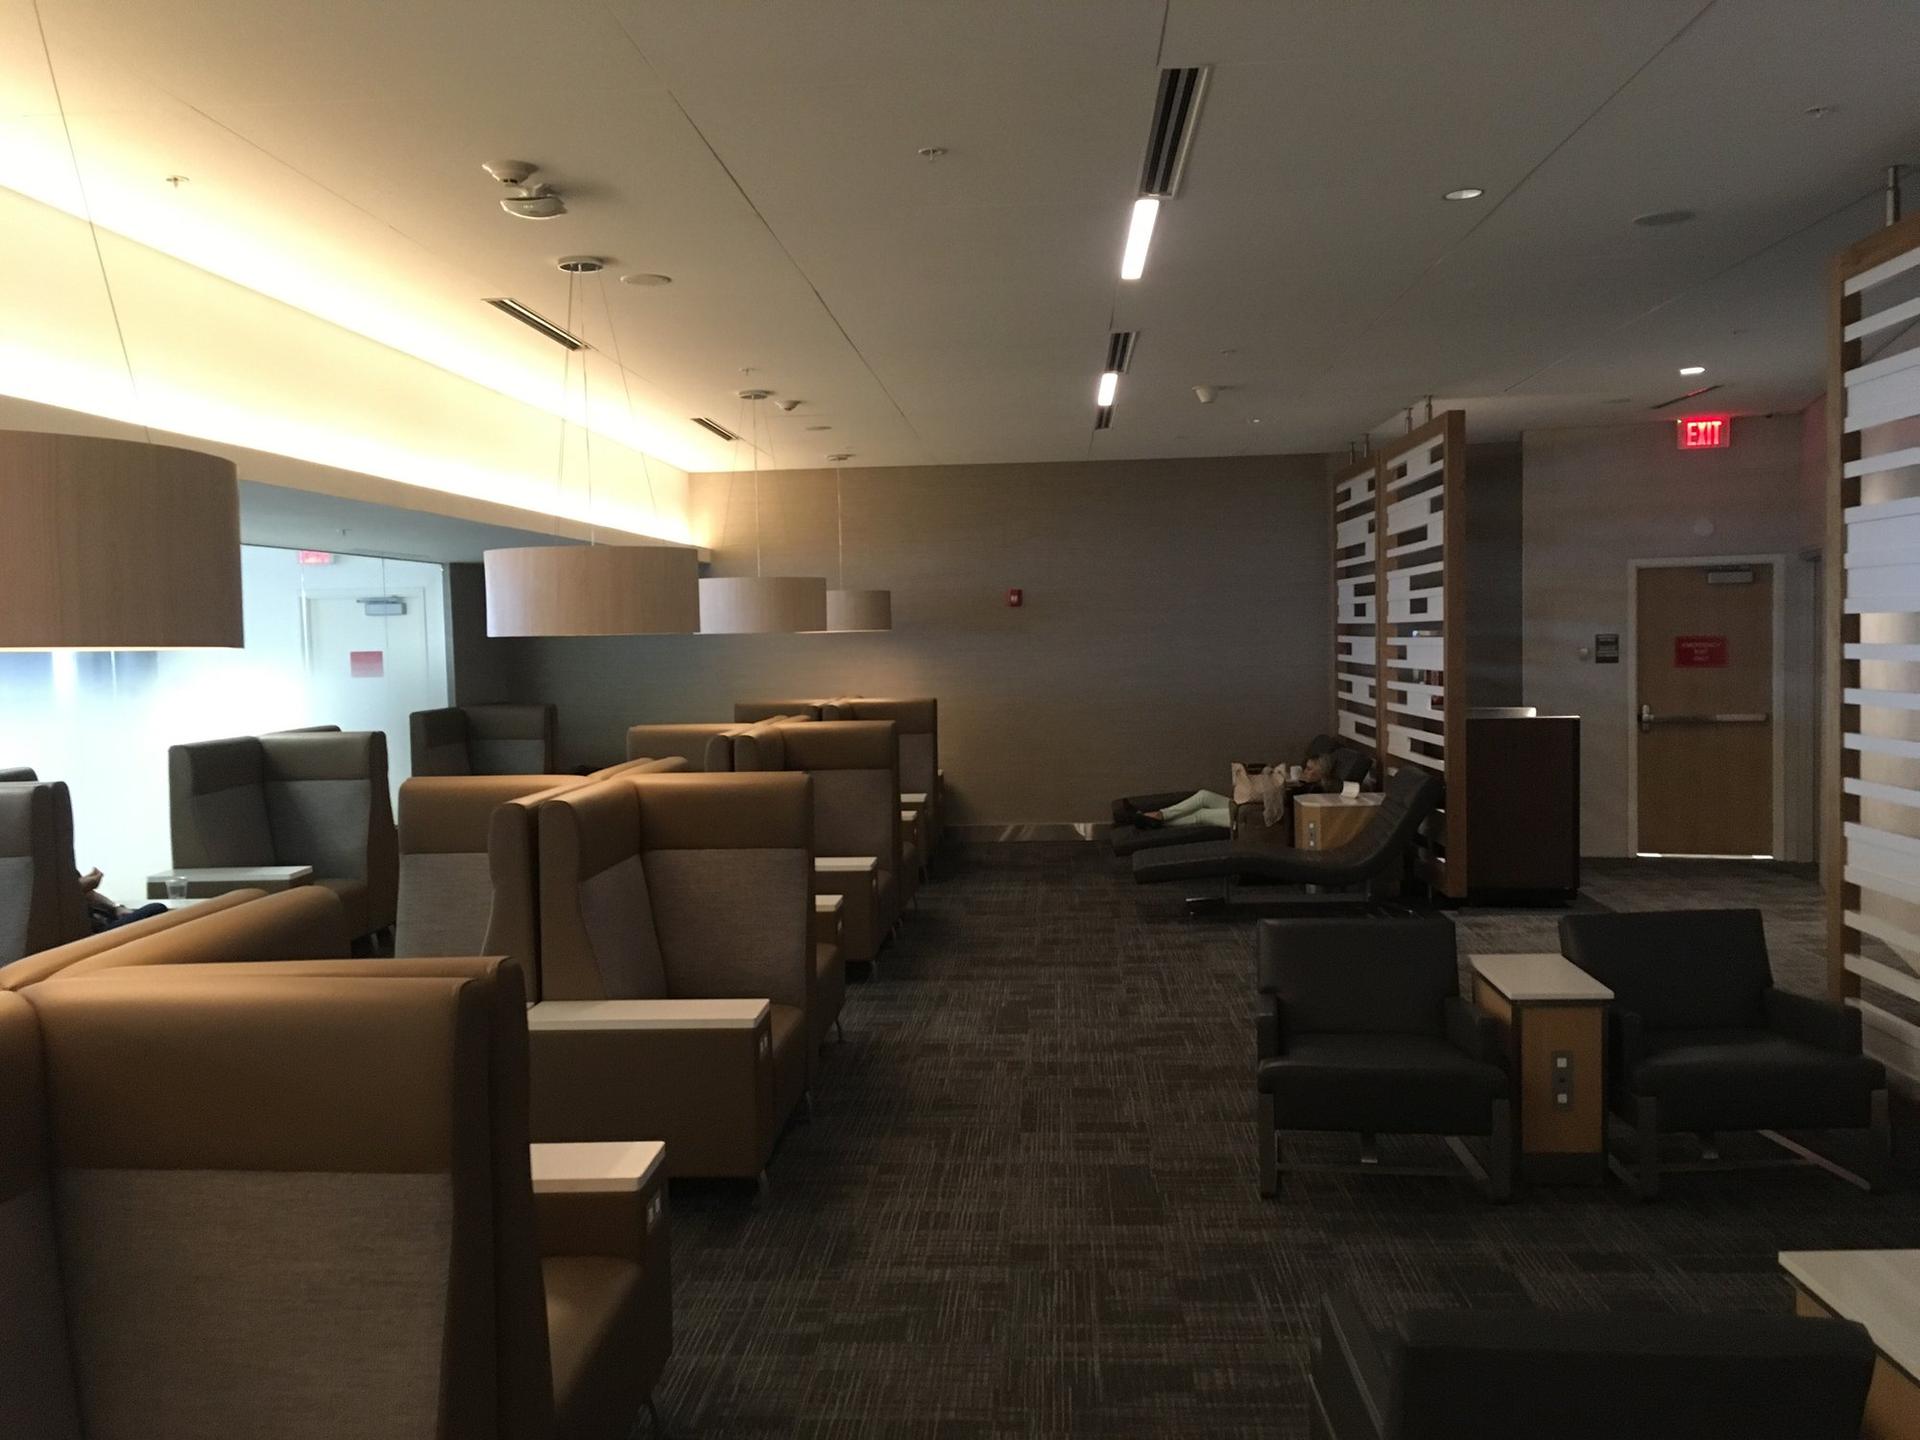 American Airlines Flagship Lounge image 29 of 65